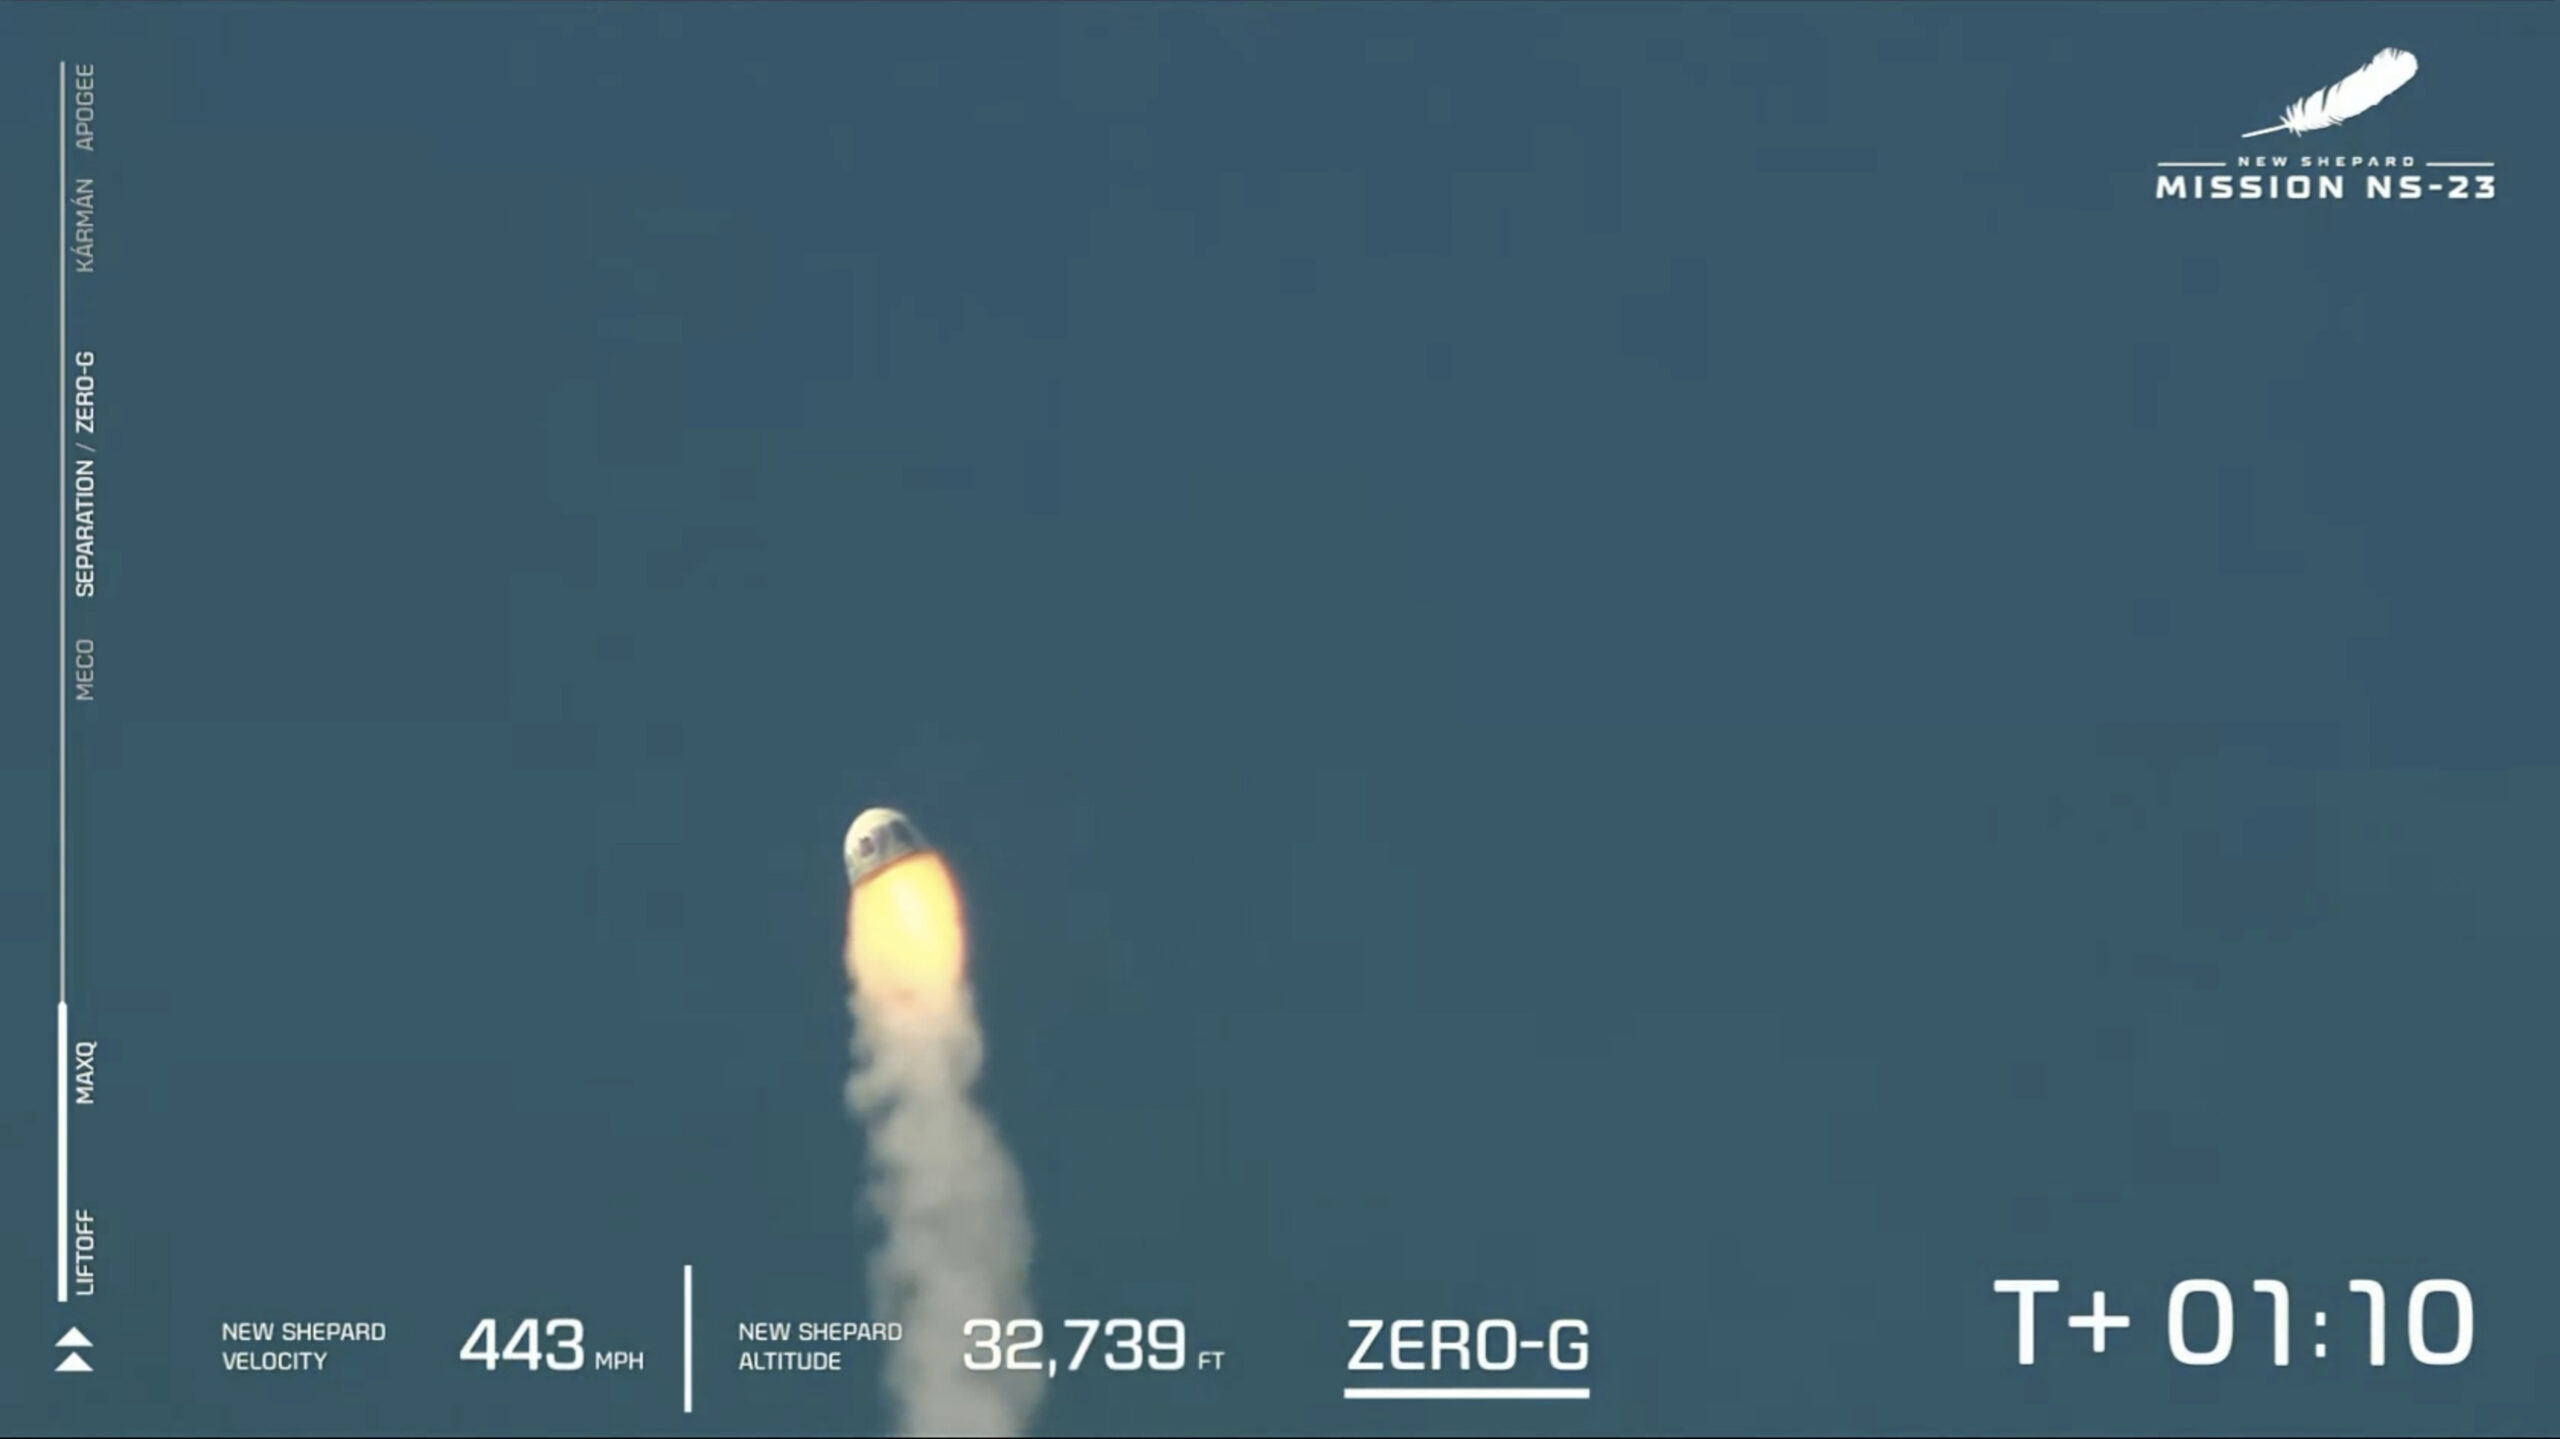 This image provided by Blue Origin shows a capsule containing science experiments after a launch failure on Monday, Sept. 12, 2022. Jeff Bezos' rocket company has suffered its first launch failure. No one was aboard, only science experiments. The Blue Origin rocket veered off course over West Texas about 1 1/2 minutes after liftoff Monday. (Blue Origin via AP)